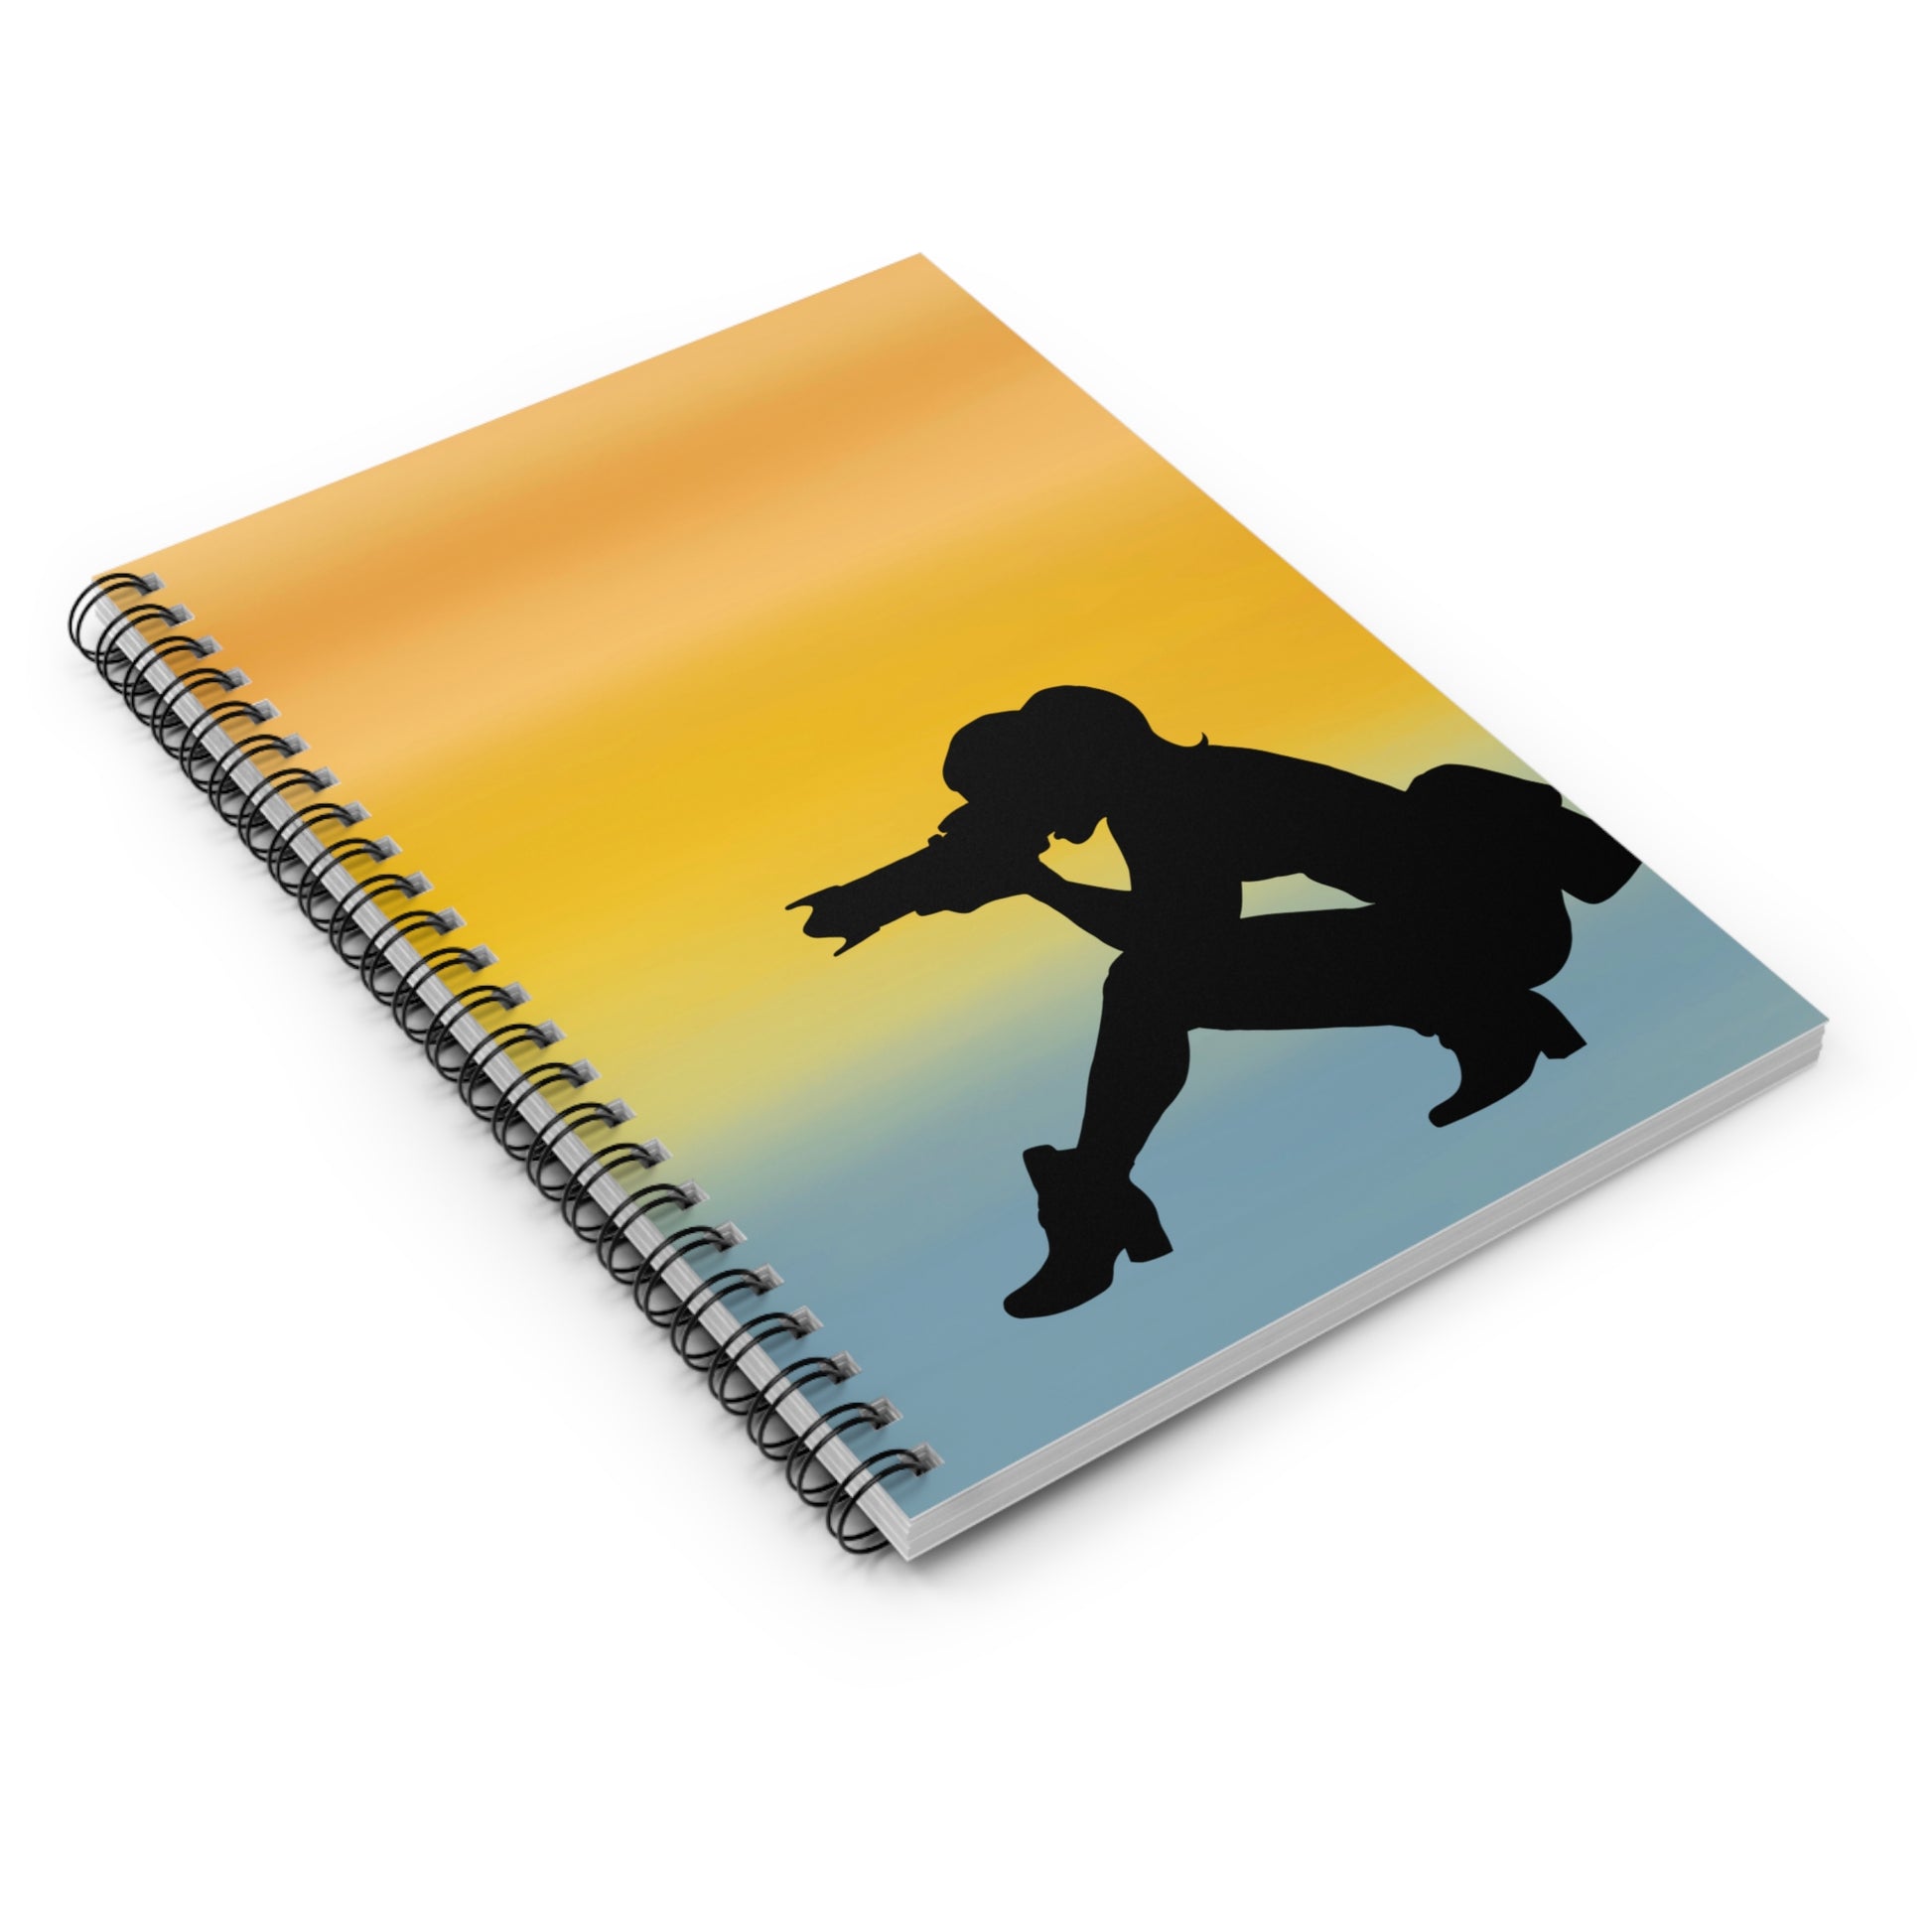 Smiles Everyone: Spiral Notebook - Log Books - Journals - Diaries - and More Custom Printed by TheGlassyLass.com